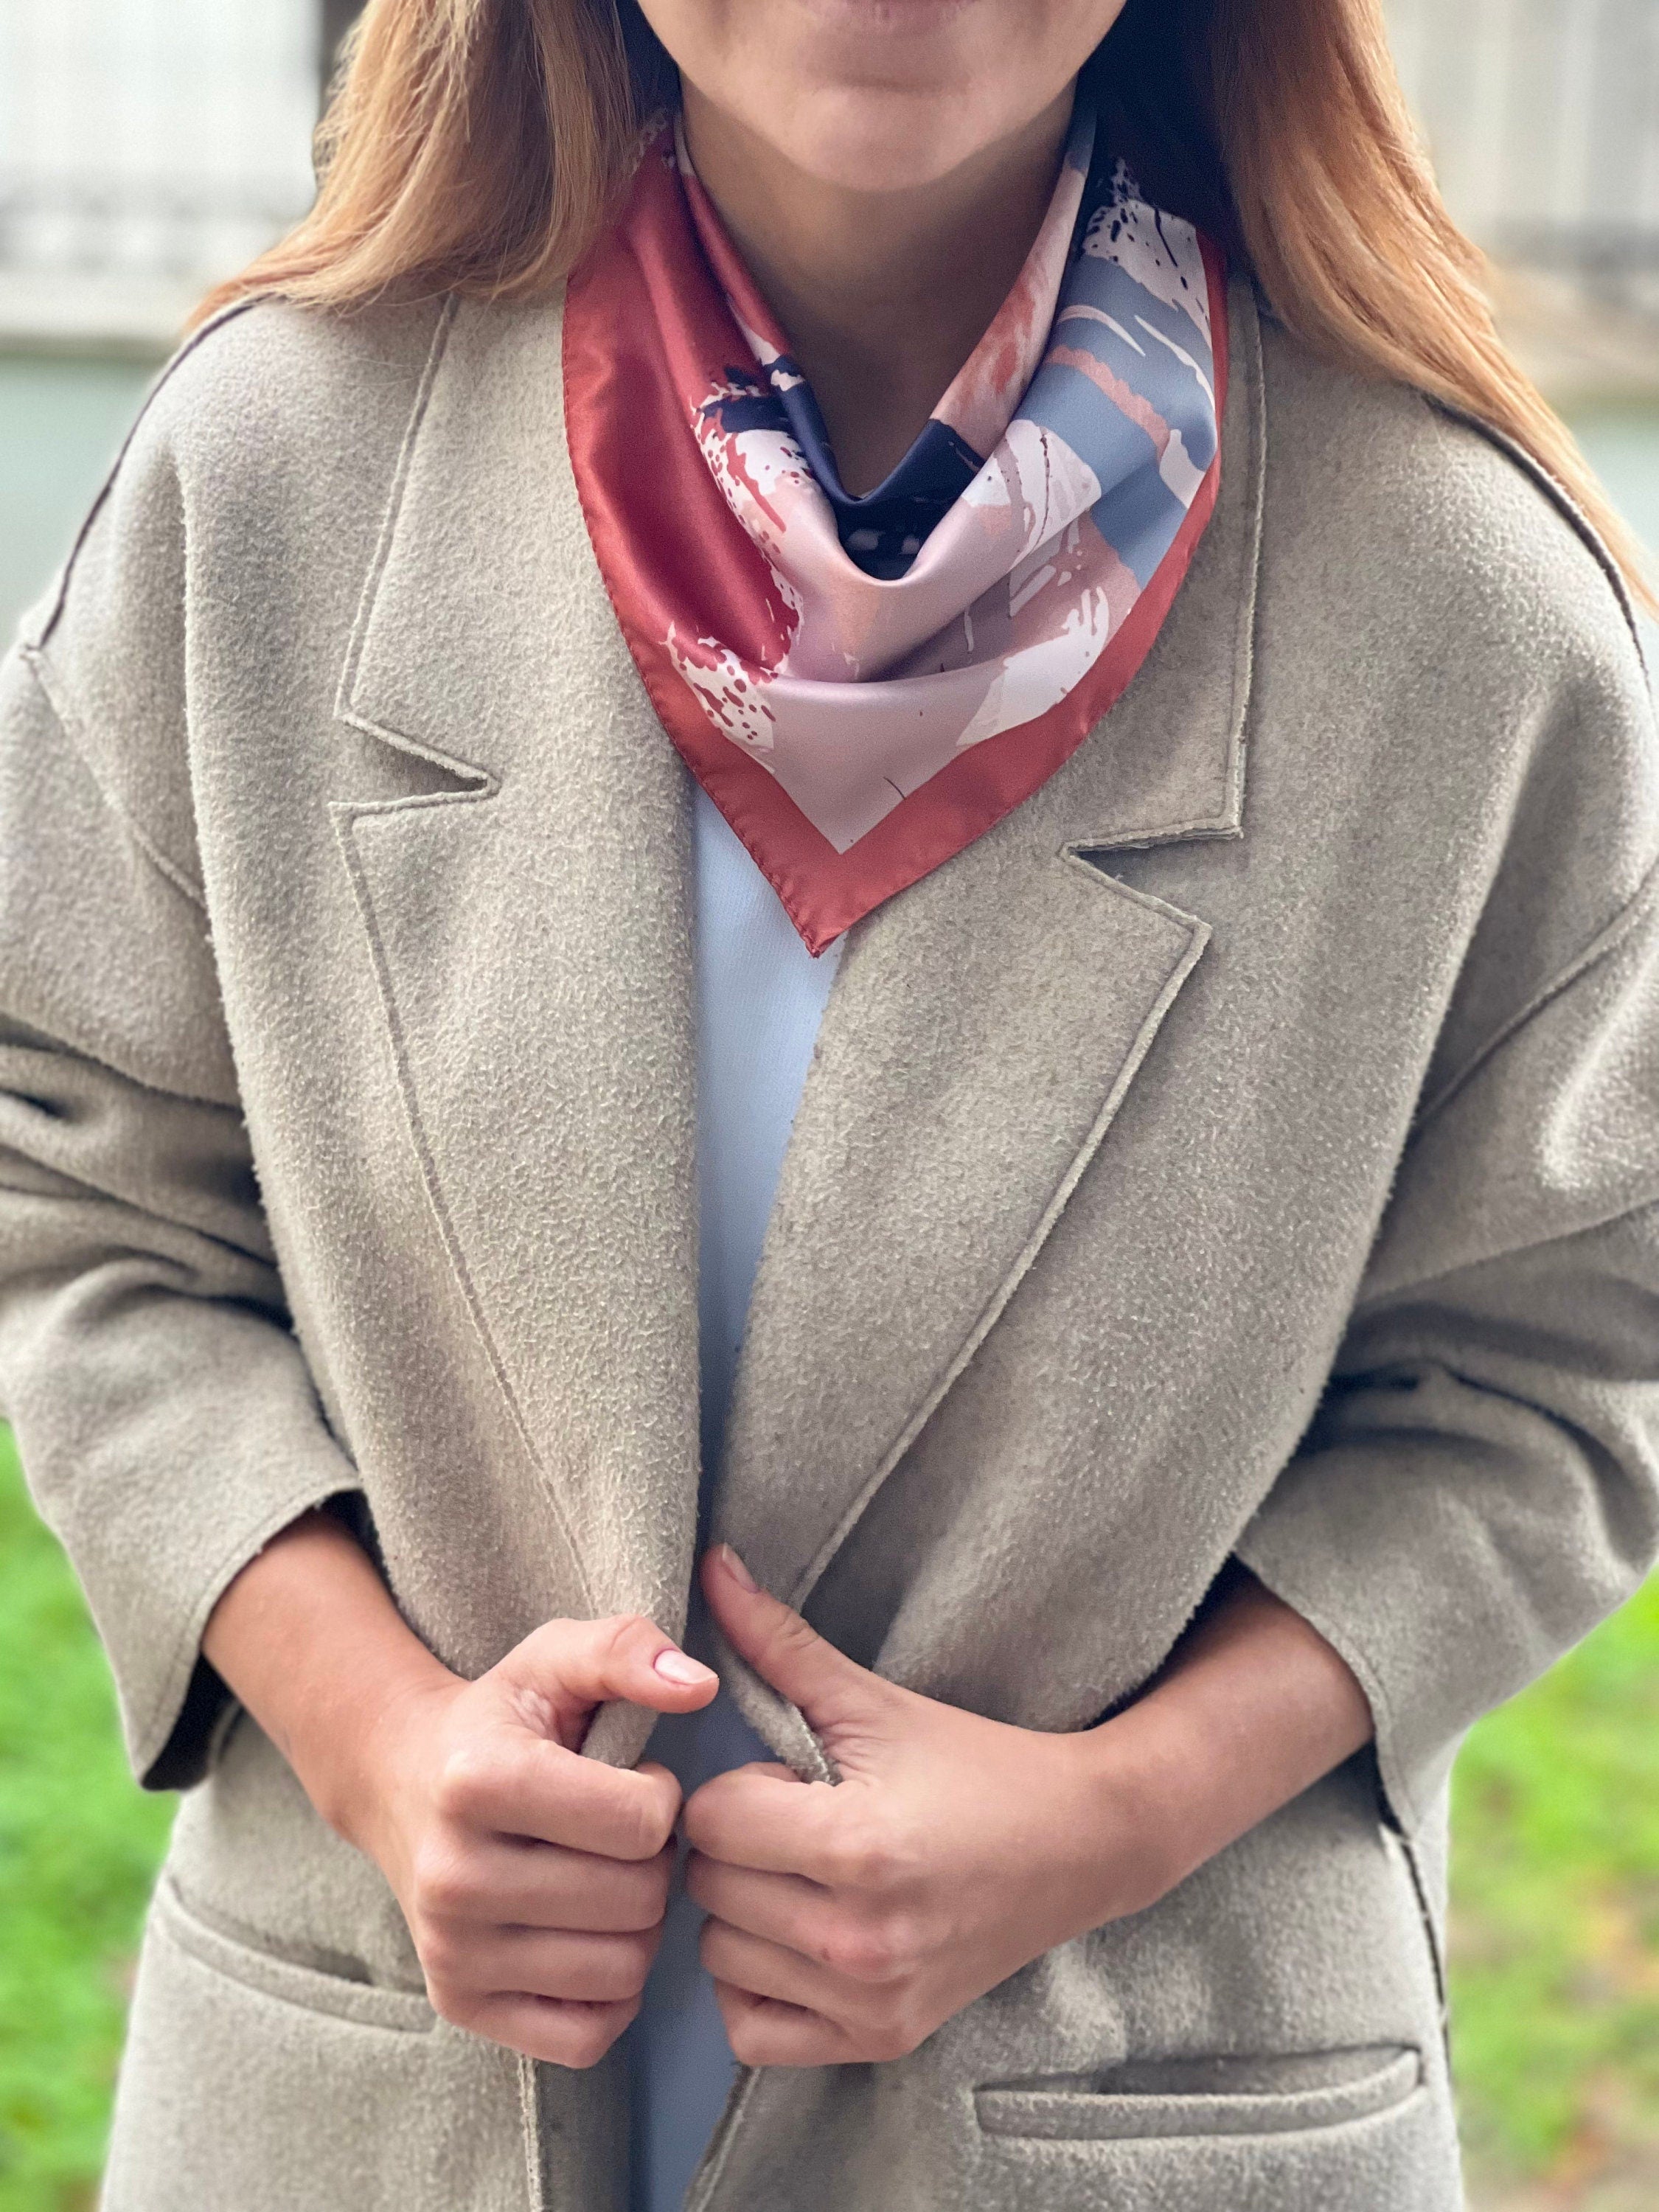 Make a statement this Spring with our range of stylish and unique hair scarves! Assorted colors and patterns will make every woman look stylish and confident.